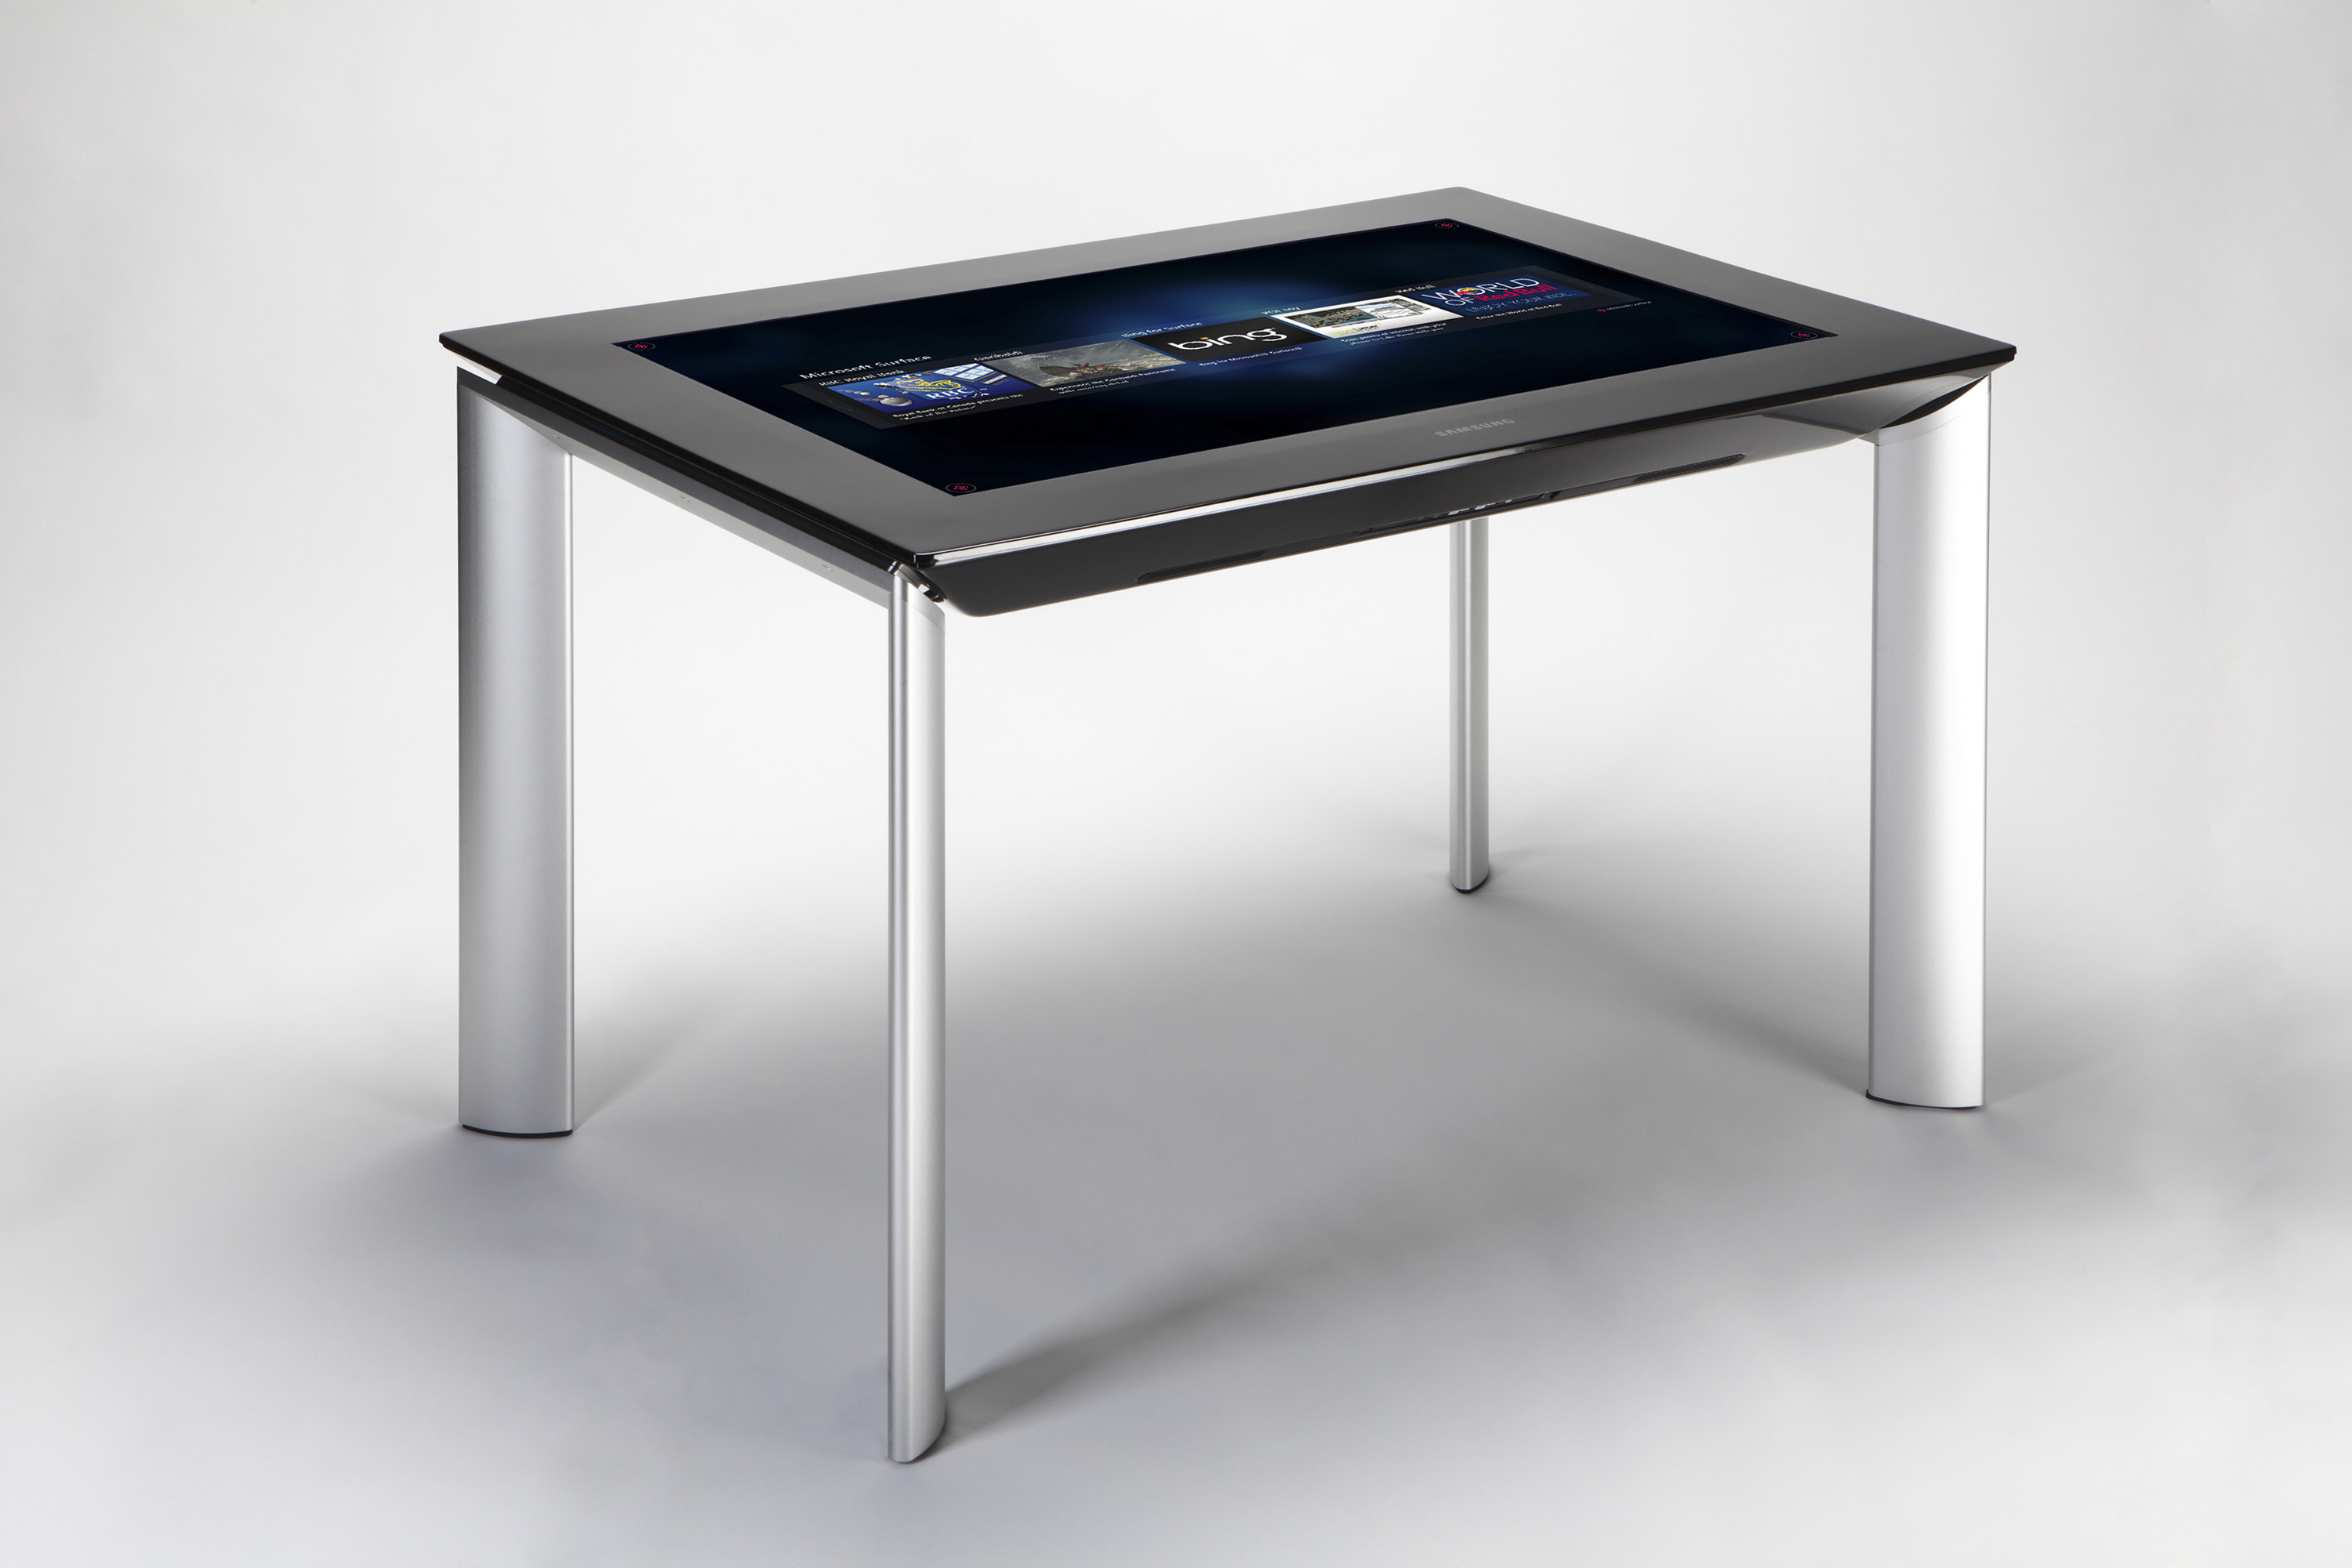 Samsung’s Next Gen Microsoft Surface Table goes On Sale